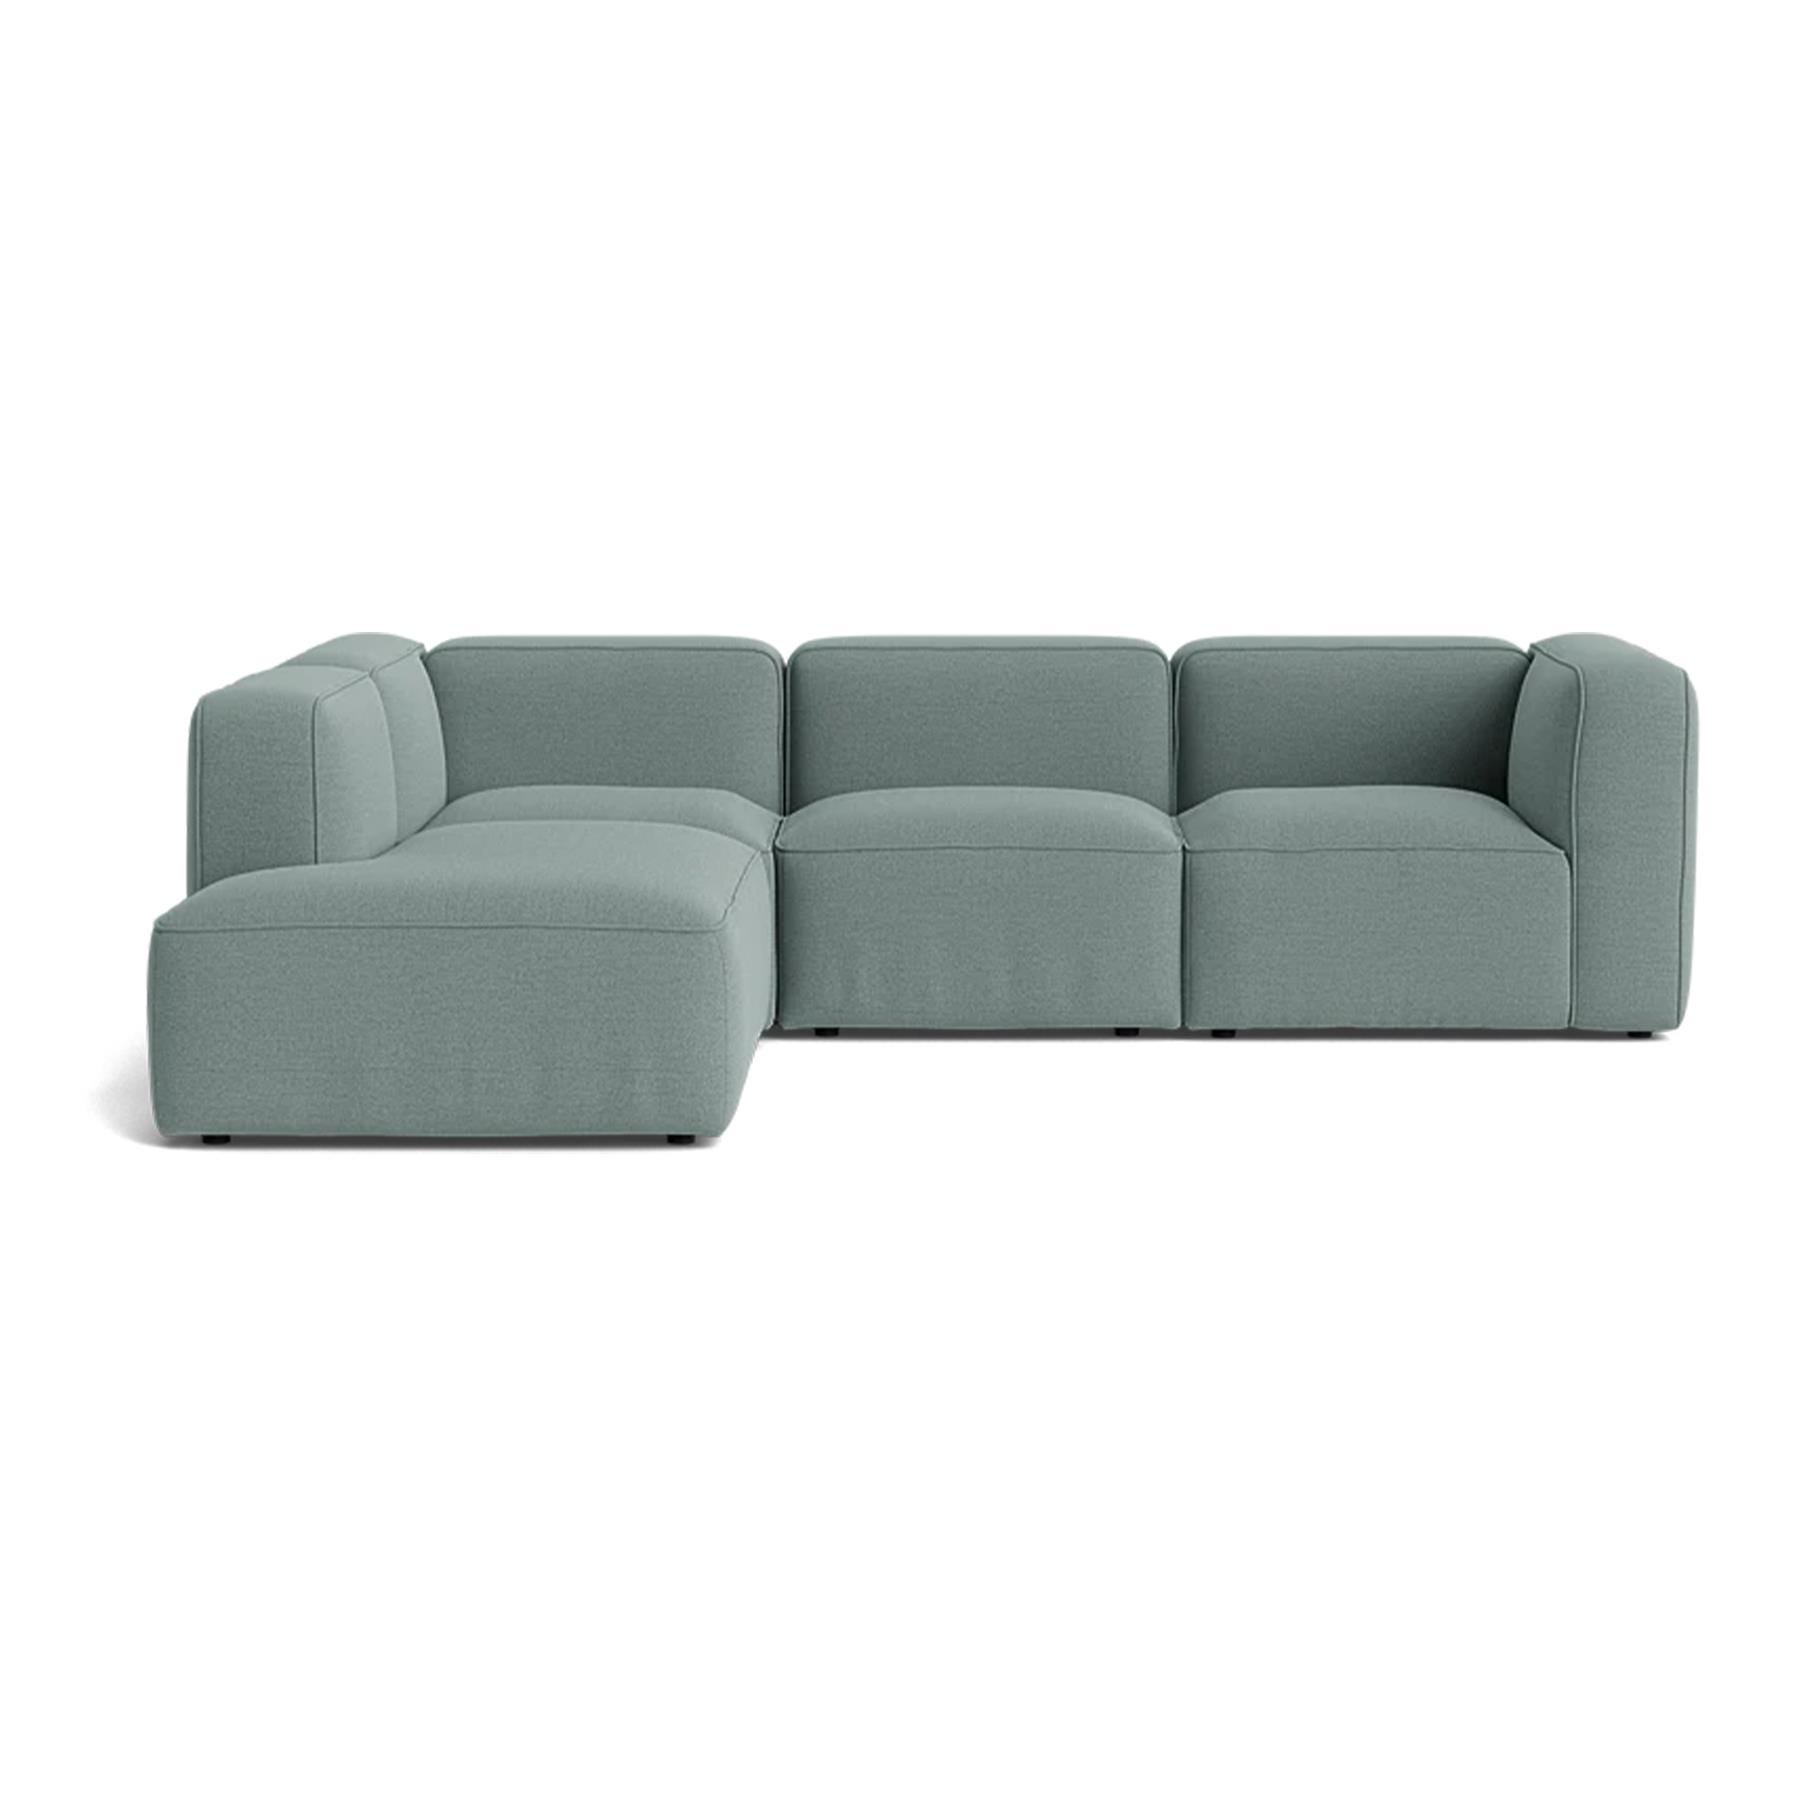 Make Nordic Basecamp Small Family Sofa Rewool 868 Left Green Designer Furniture From Holloways Of Ludlow